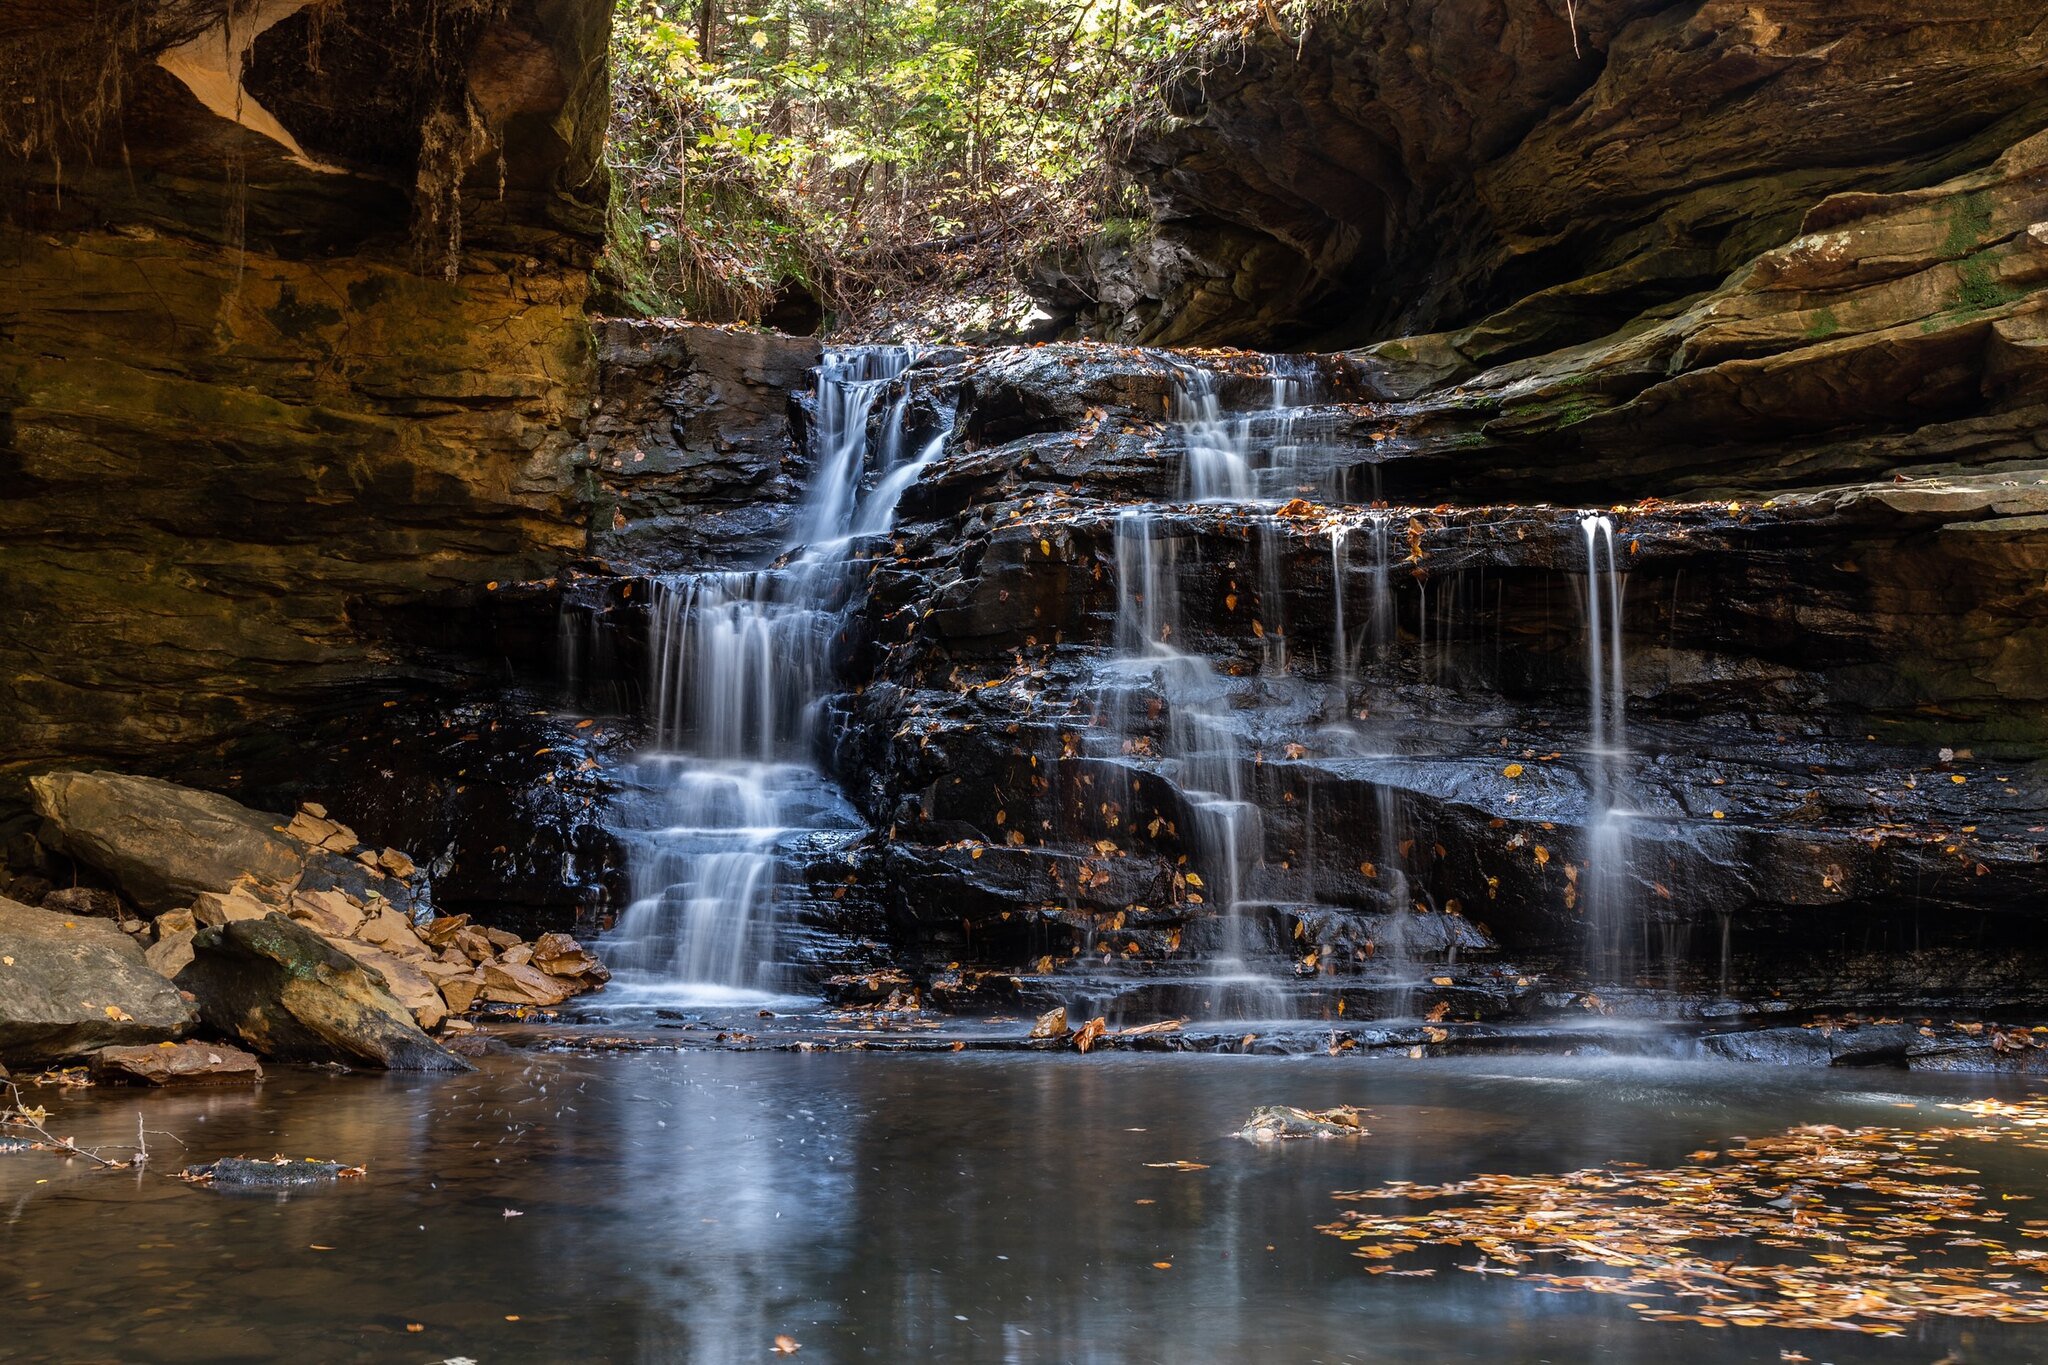 The Bankhead National Forest is one of the state’s oldest forests, and this natural beauty sets in the center of the Cumberland Plateau.